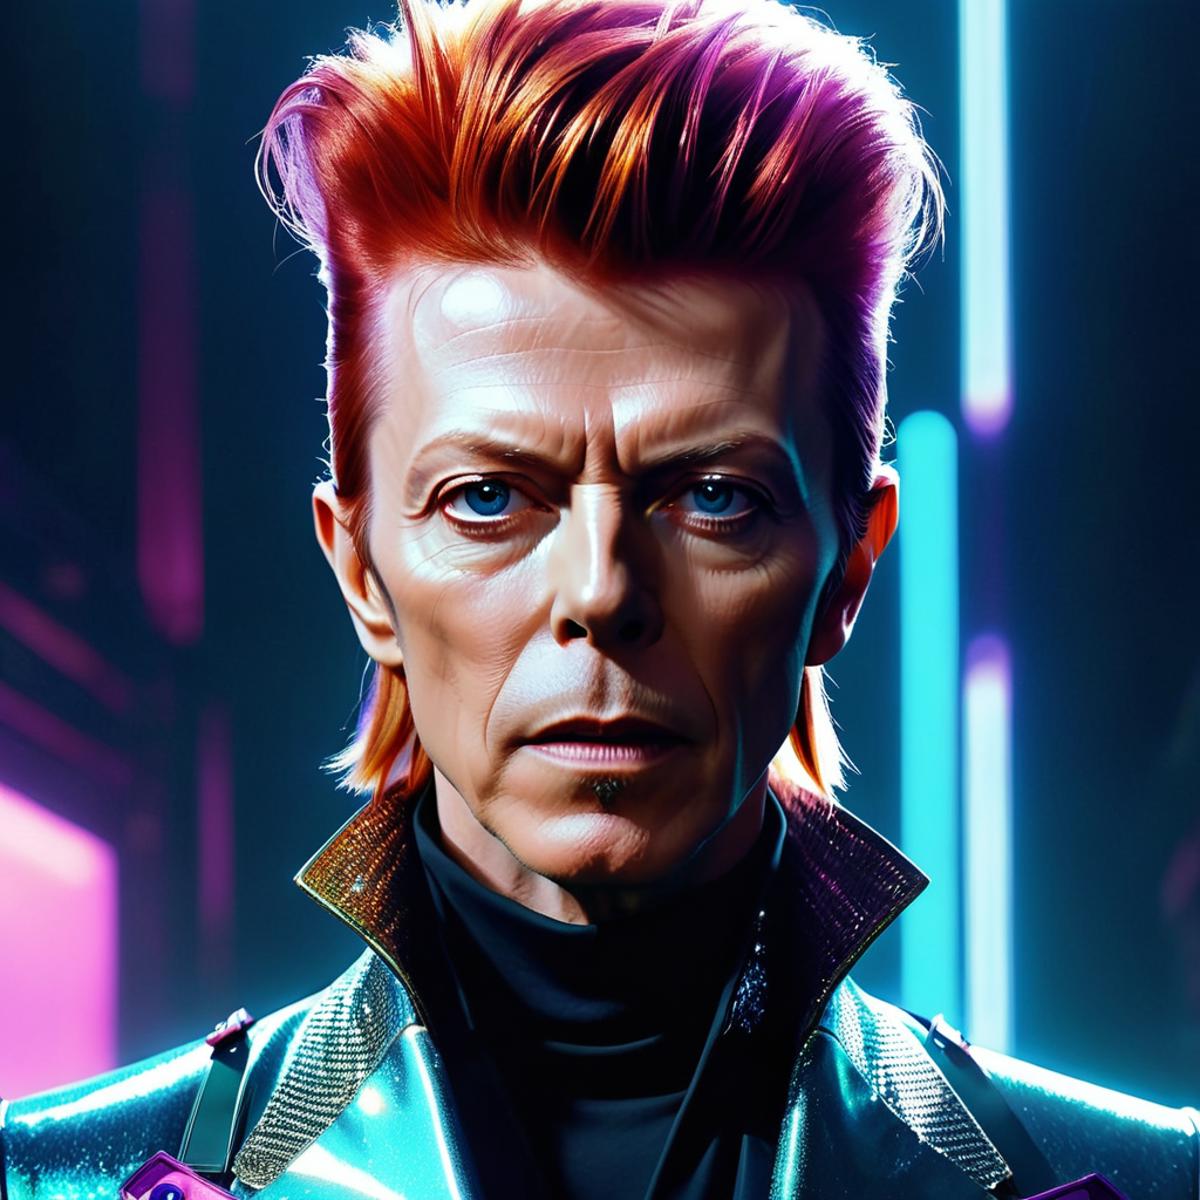 A Digital Illustration of a Man with Red Hair and Purple Eyes.